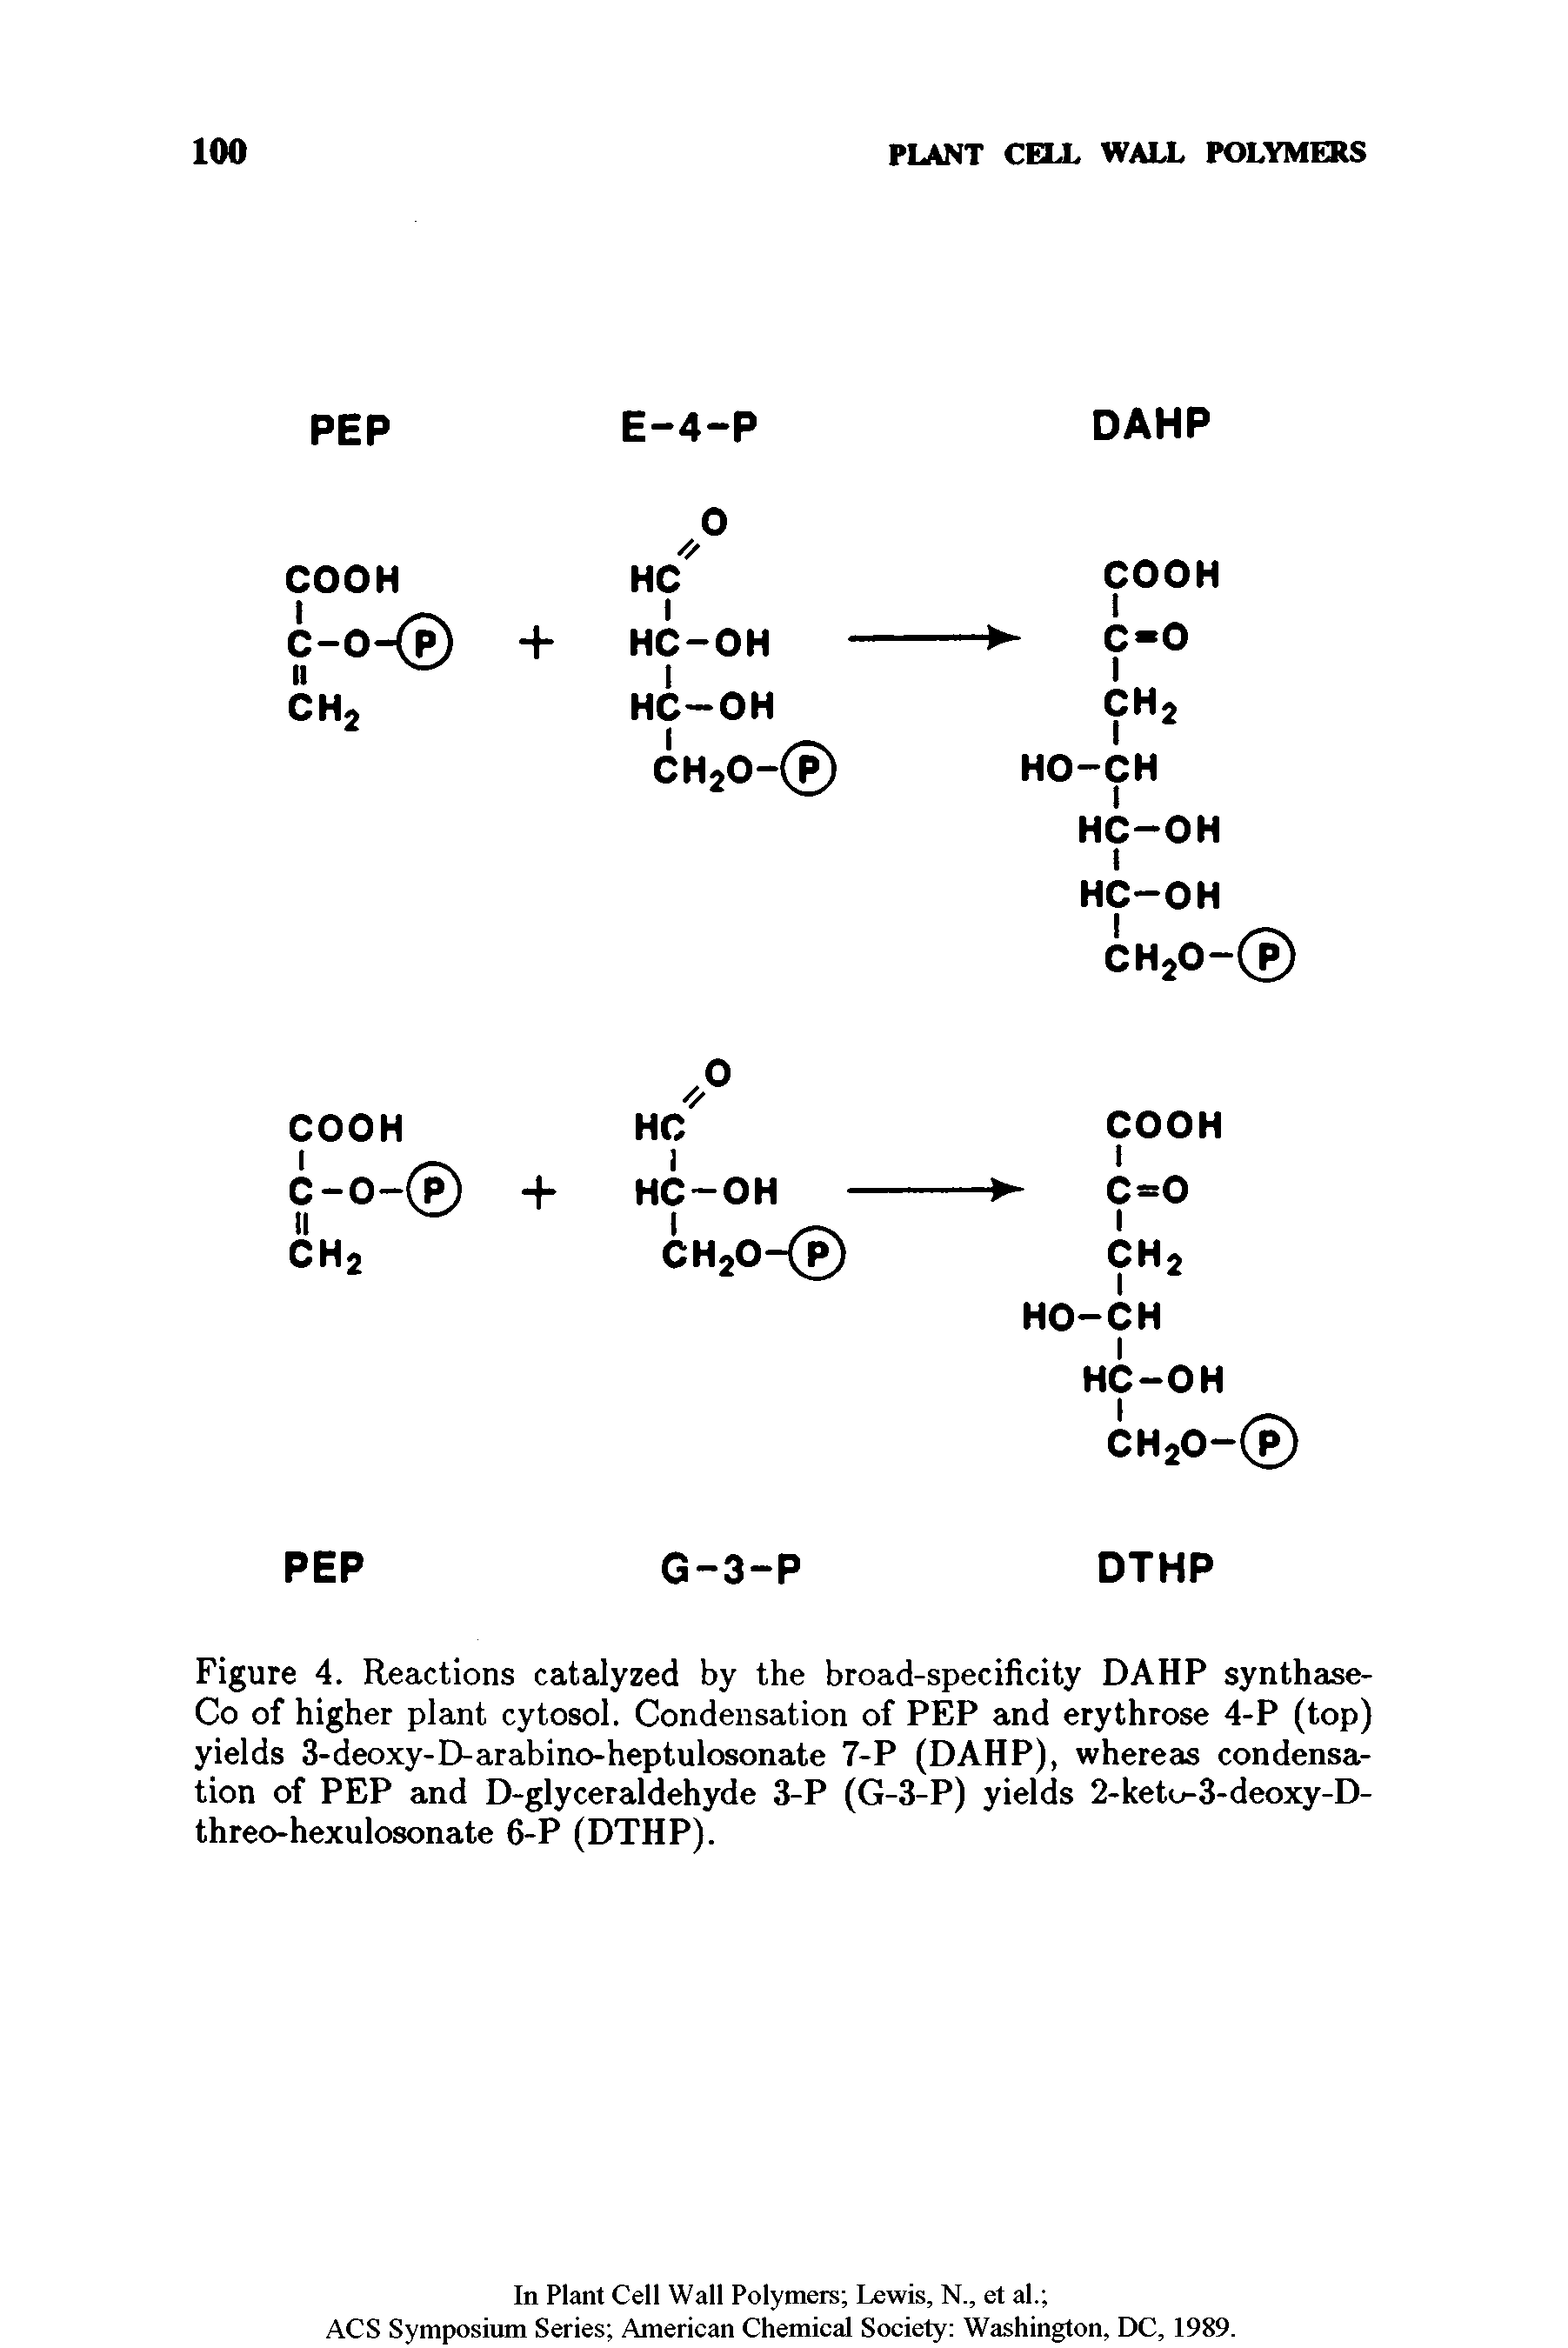 Figure 4. Reactions catalyzed by the broad-specificity DAHP synthase-Co of higher plant cytosol. Condensation of PEP and erythrose 4-P (top) yields 3-deoxy-D-arabino-heptulosonate 7-P (DAHP), whereas condensation of PEP and D-glyceraldehyde 3-P (G-3-P) yields 2-keto-3-deoxy-D-threo-hexulosonate 6-P (DTHP).